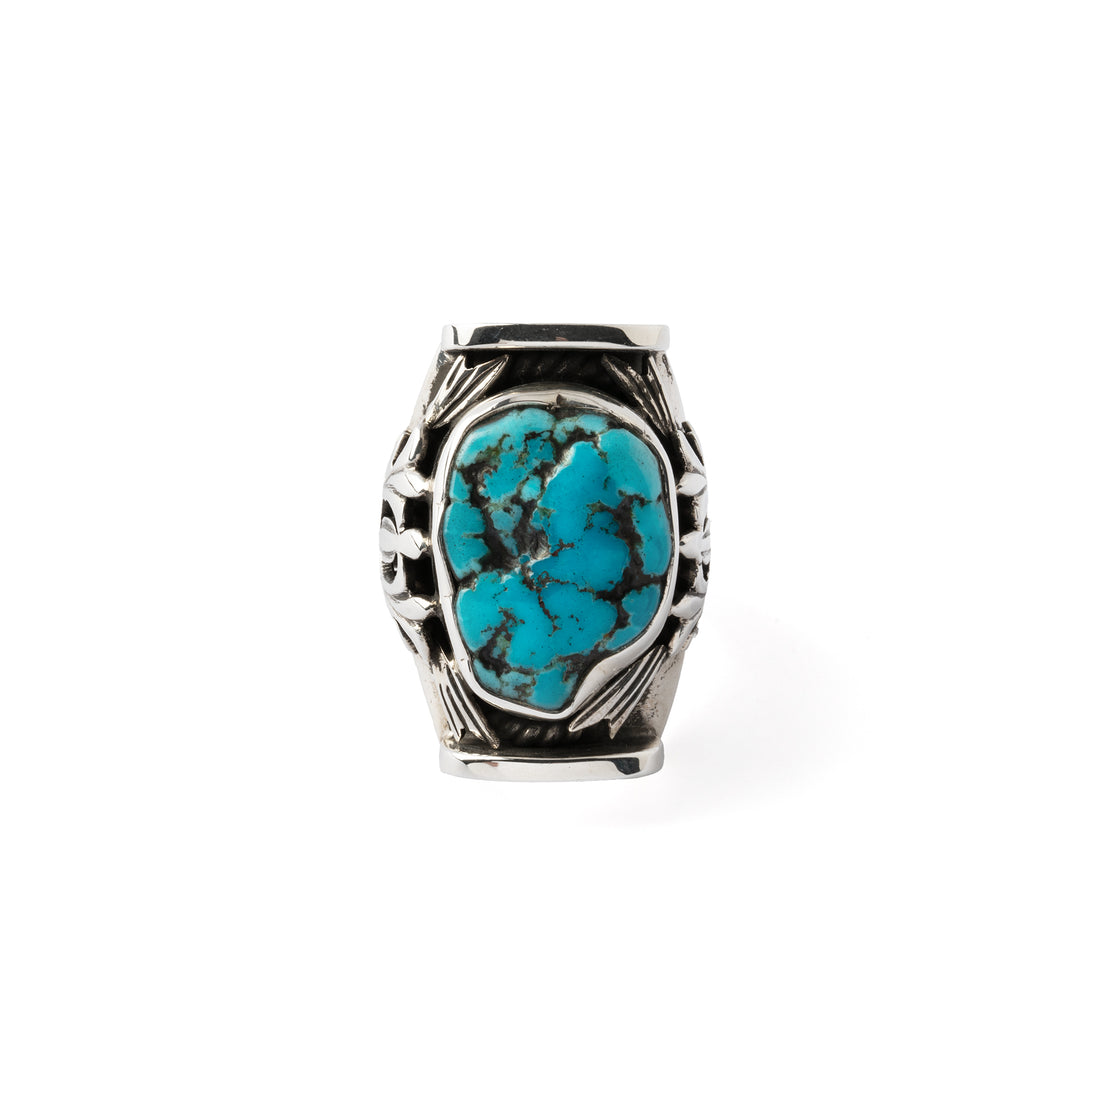 Hallmarked Silver Saddle Ring with Turquoise